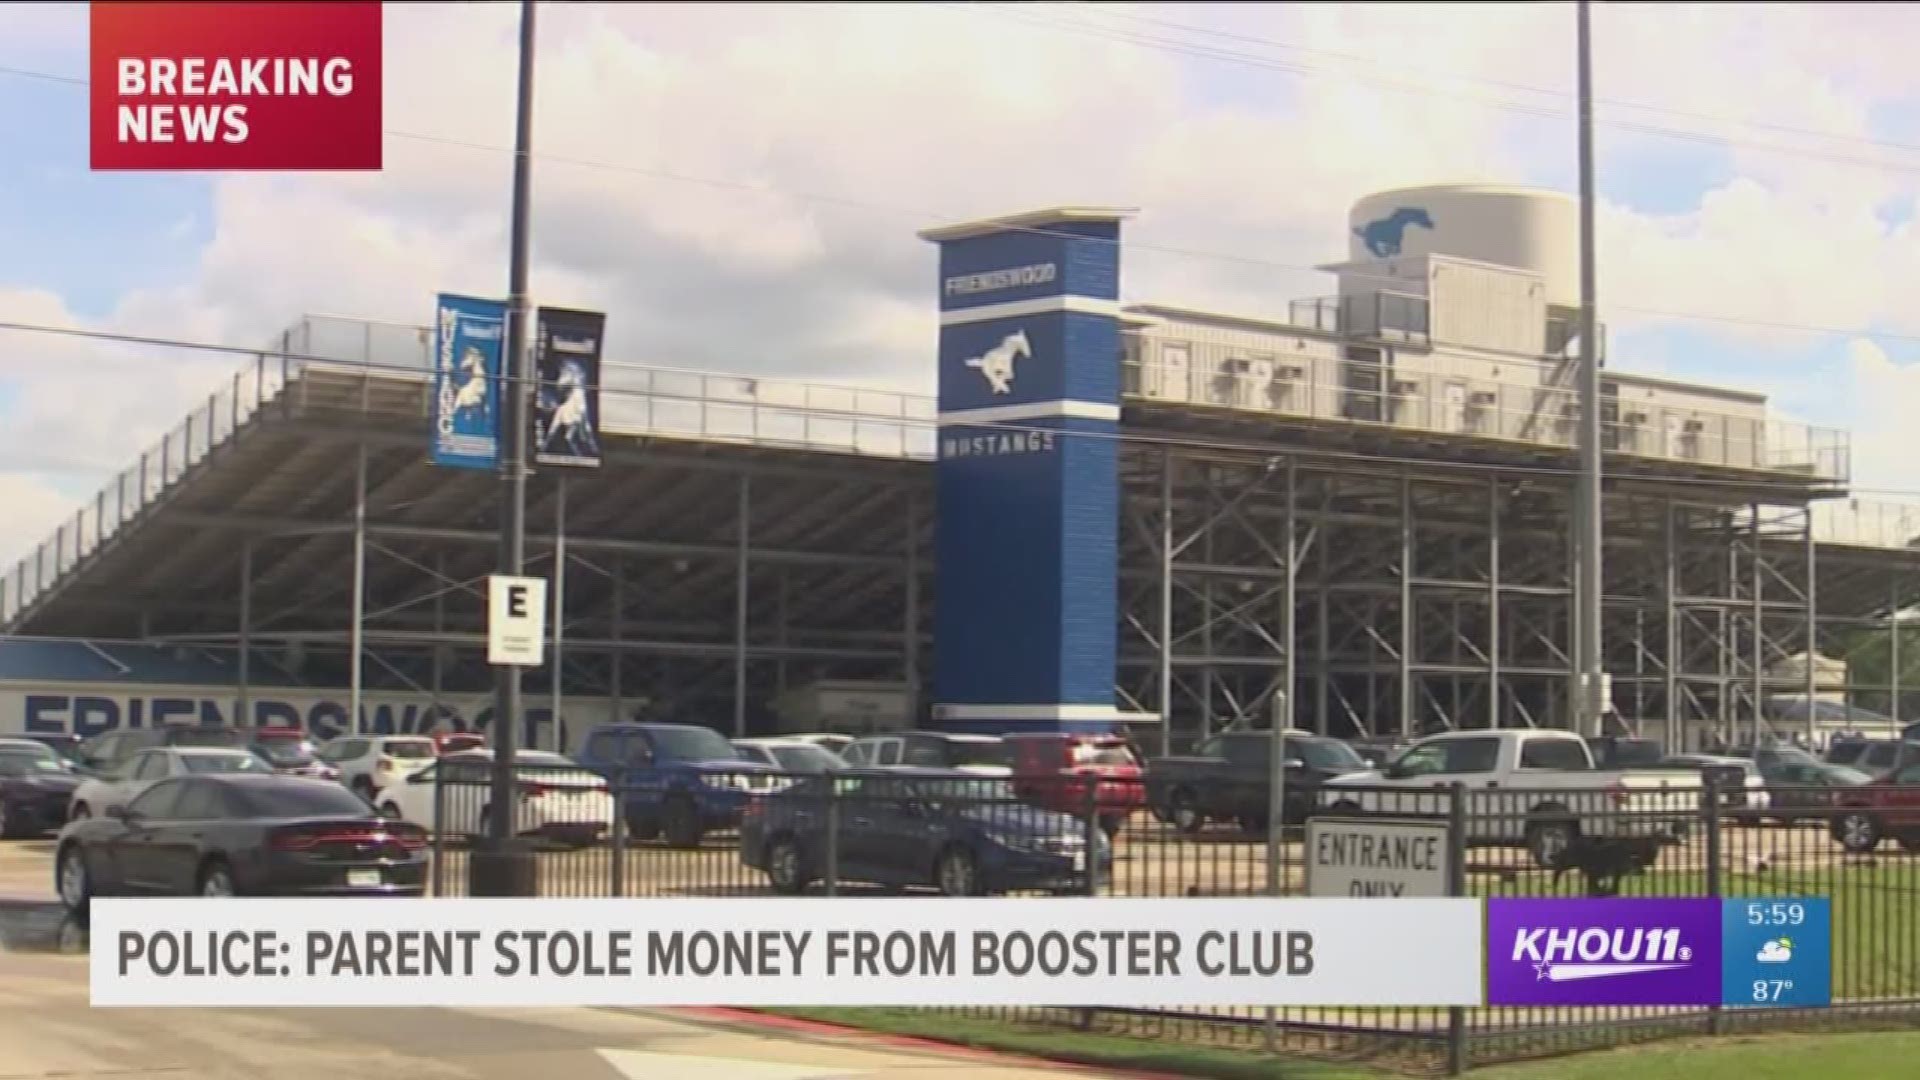 Detectives heard complaints Friday from boosters claiming a volunteer stole donations from the Friendswood High School booster club. The money was earmarked to help the school's 800 athletes buy equipment and pay fees. 